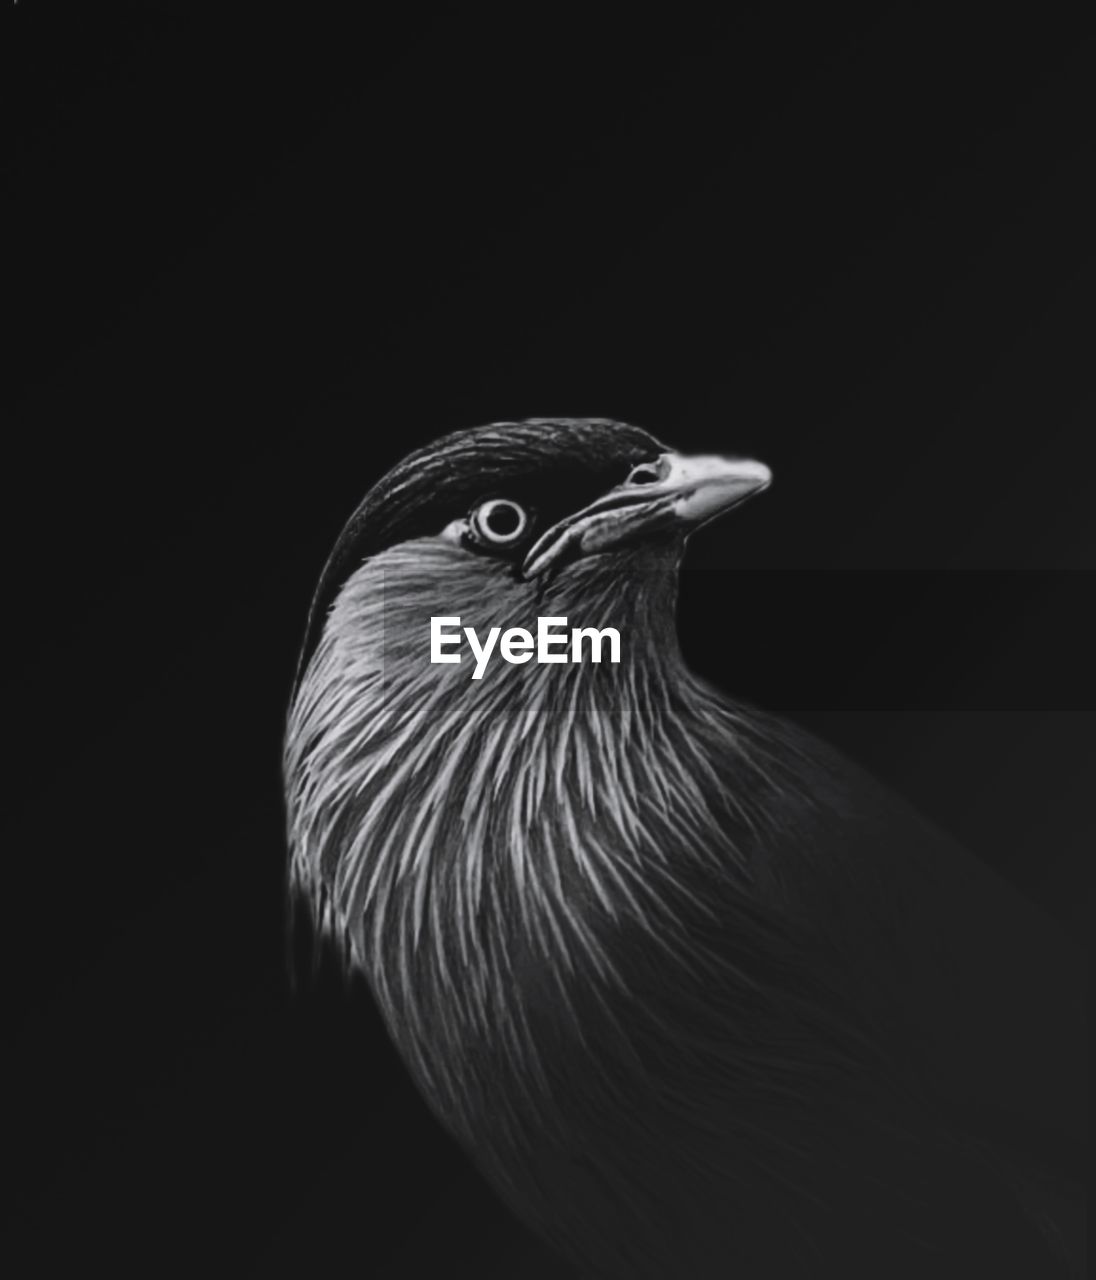 CLOSE-UP OF A BIRD OVER BLACK BACKGROUND